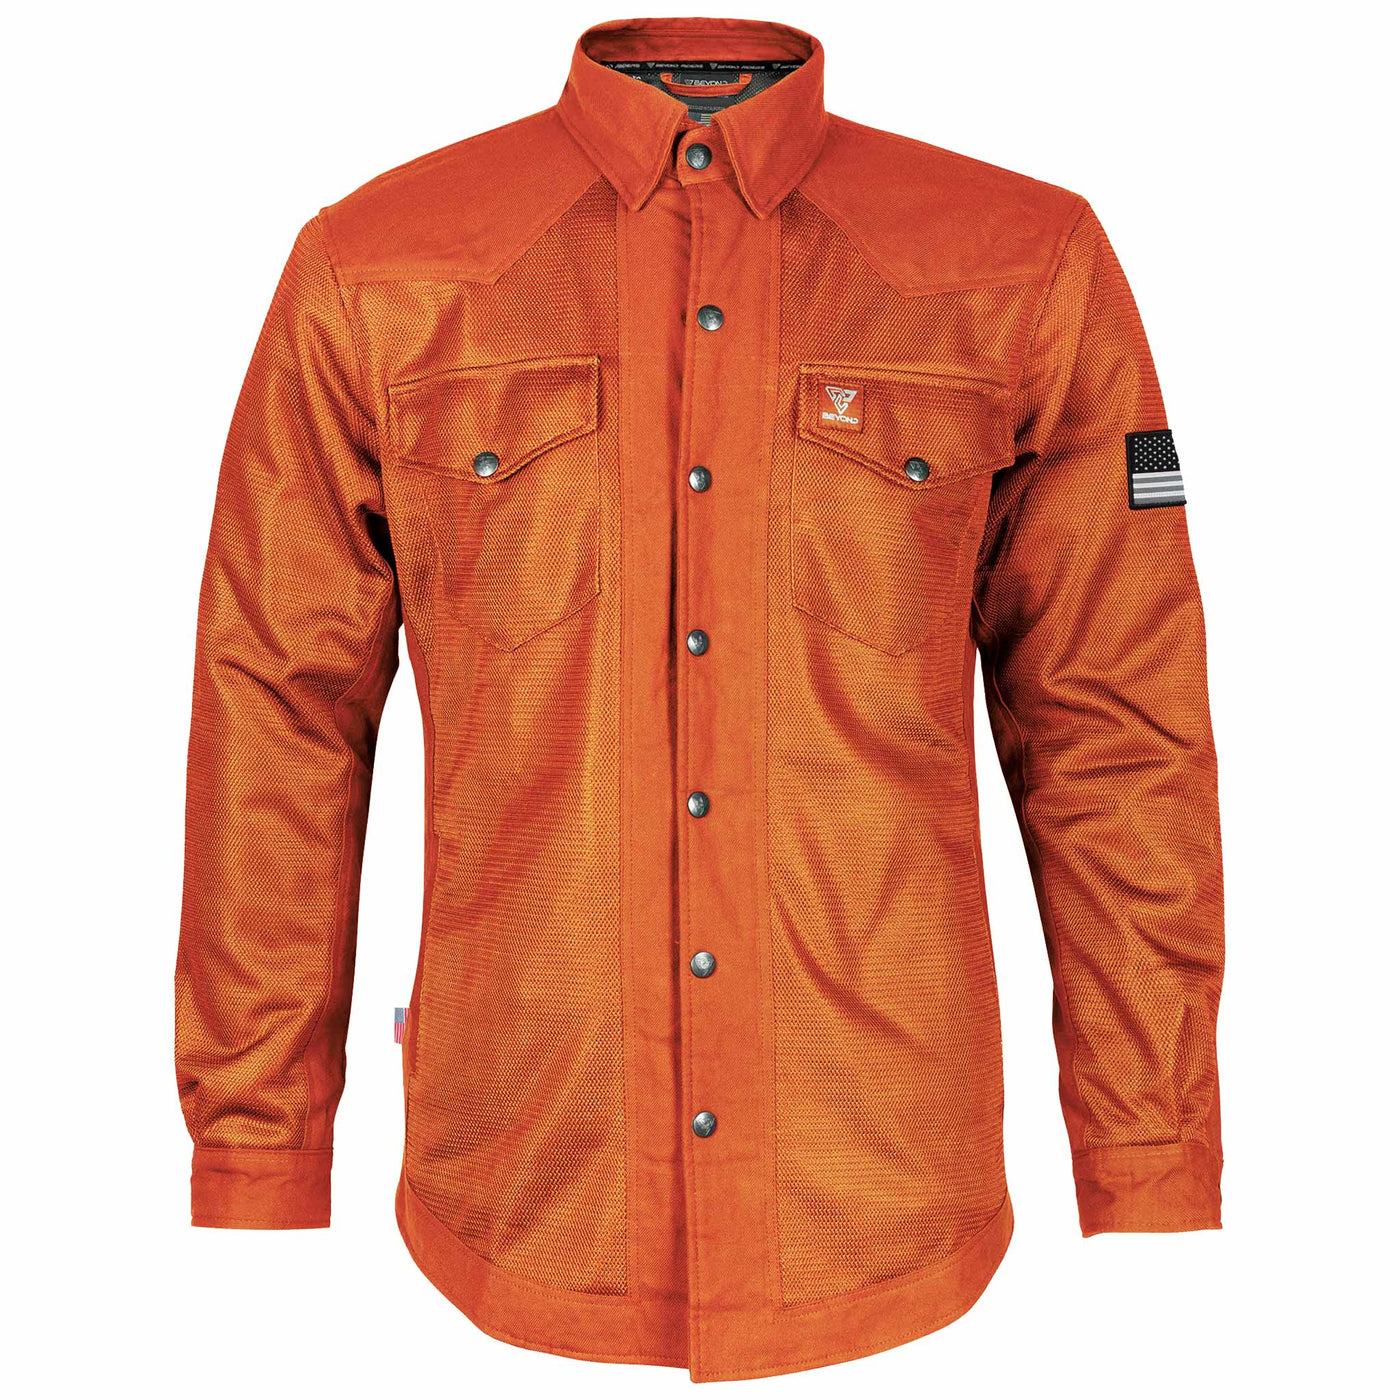 Protective Summer Mesh Shirt with Pads - Orange Solid